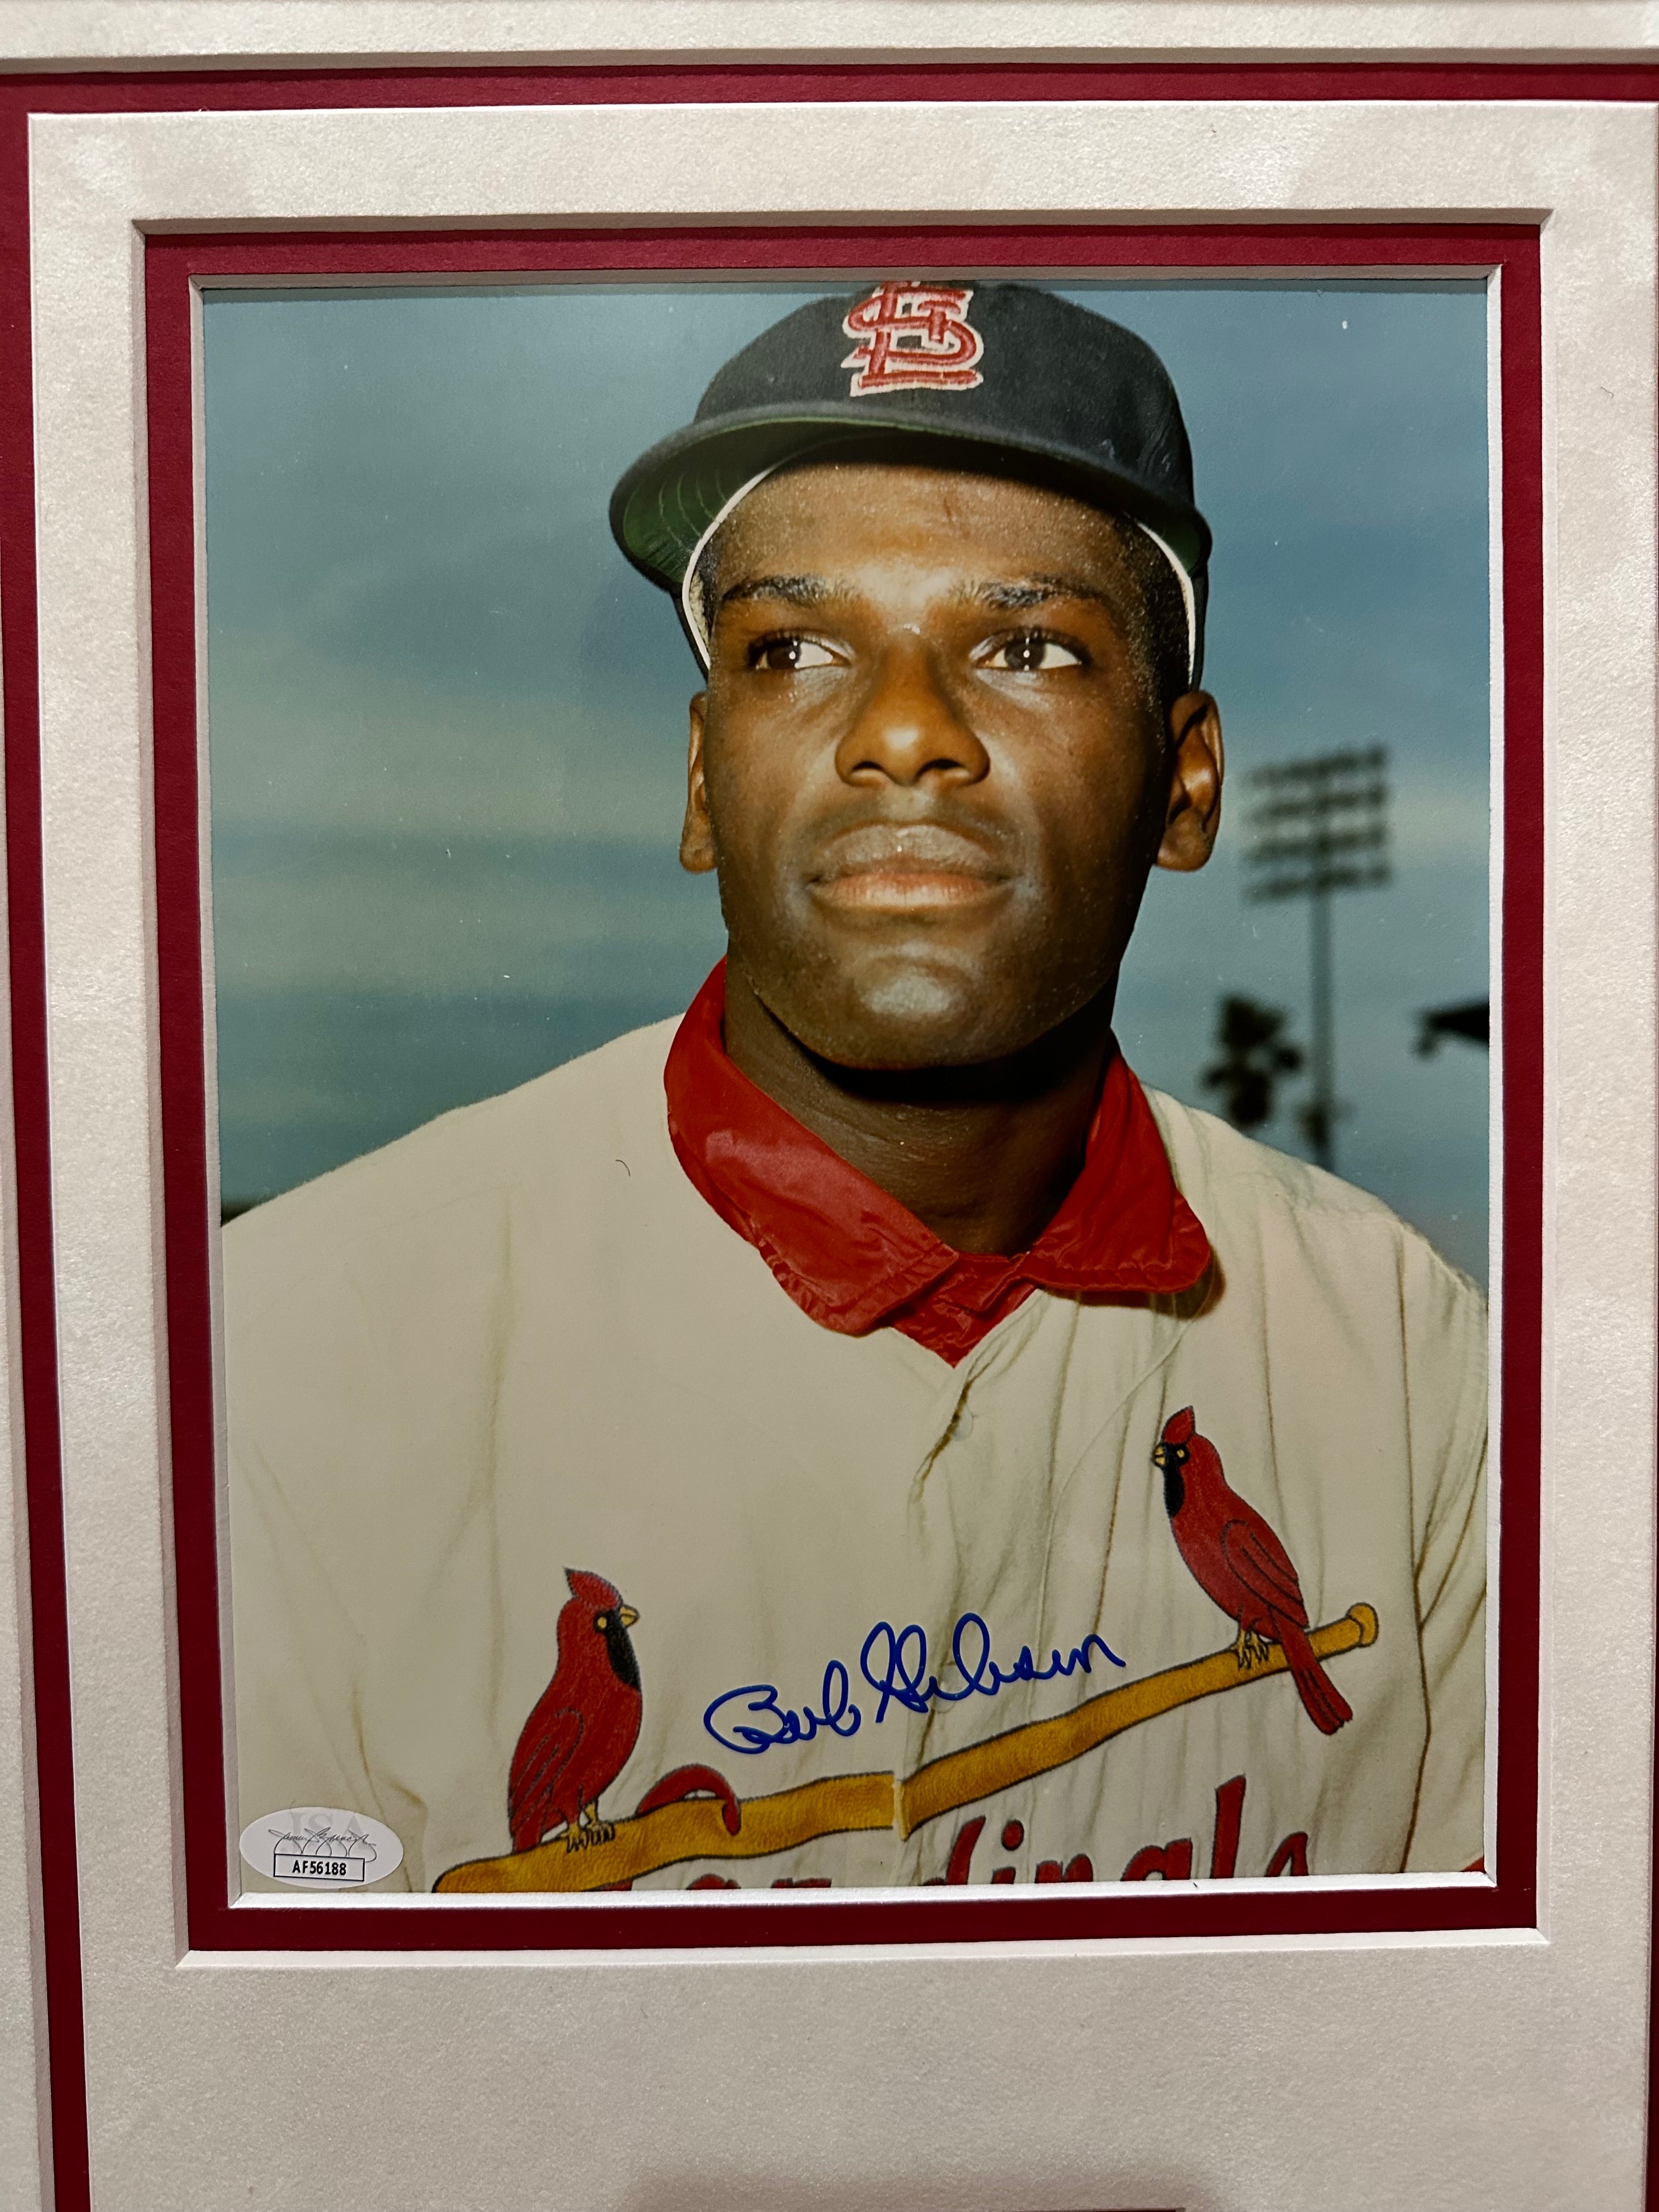 BOB GIBSON AUTOGRAPHED SIGNED 8x10 PHOTO FRAMED W/GRADED CARD JSA CARDINALS